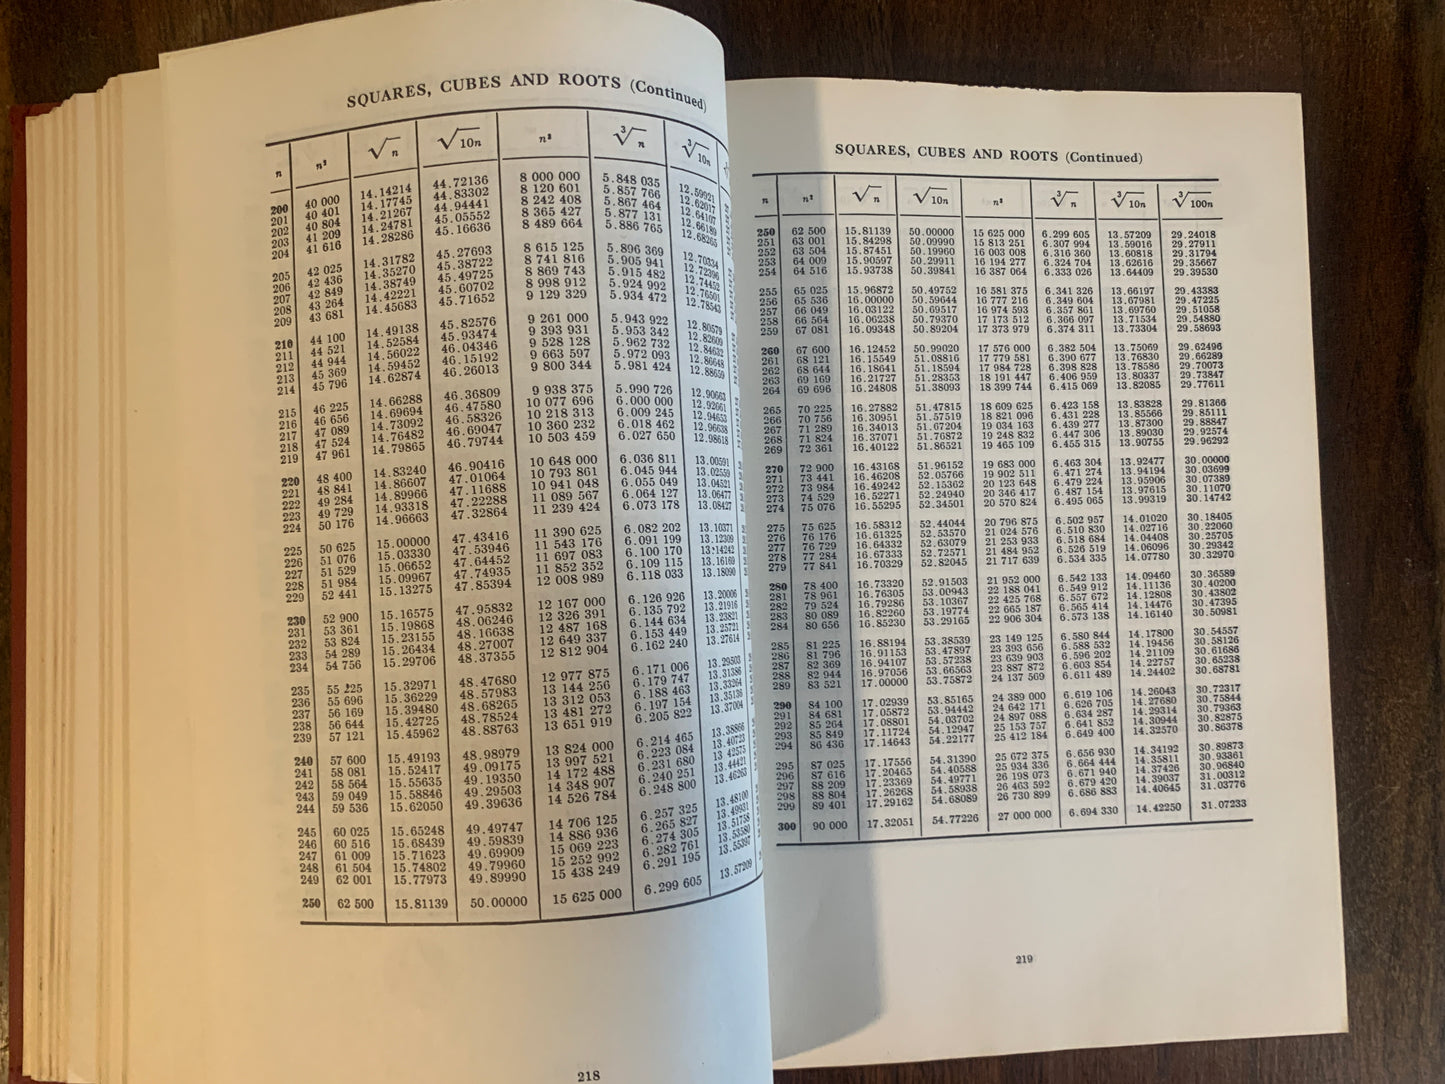 CRC Standard Mathematical Tables: Student Edition 14th Edition 1965